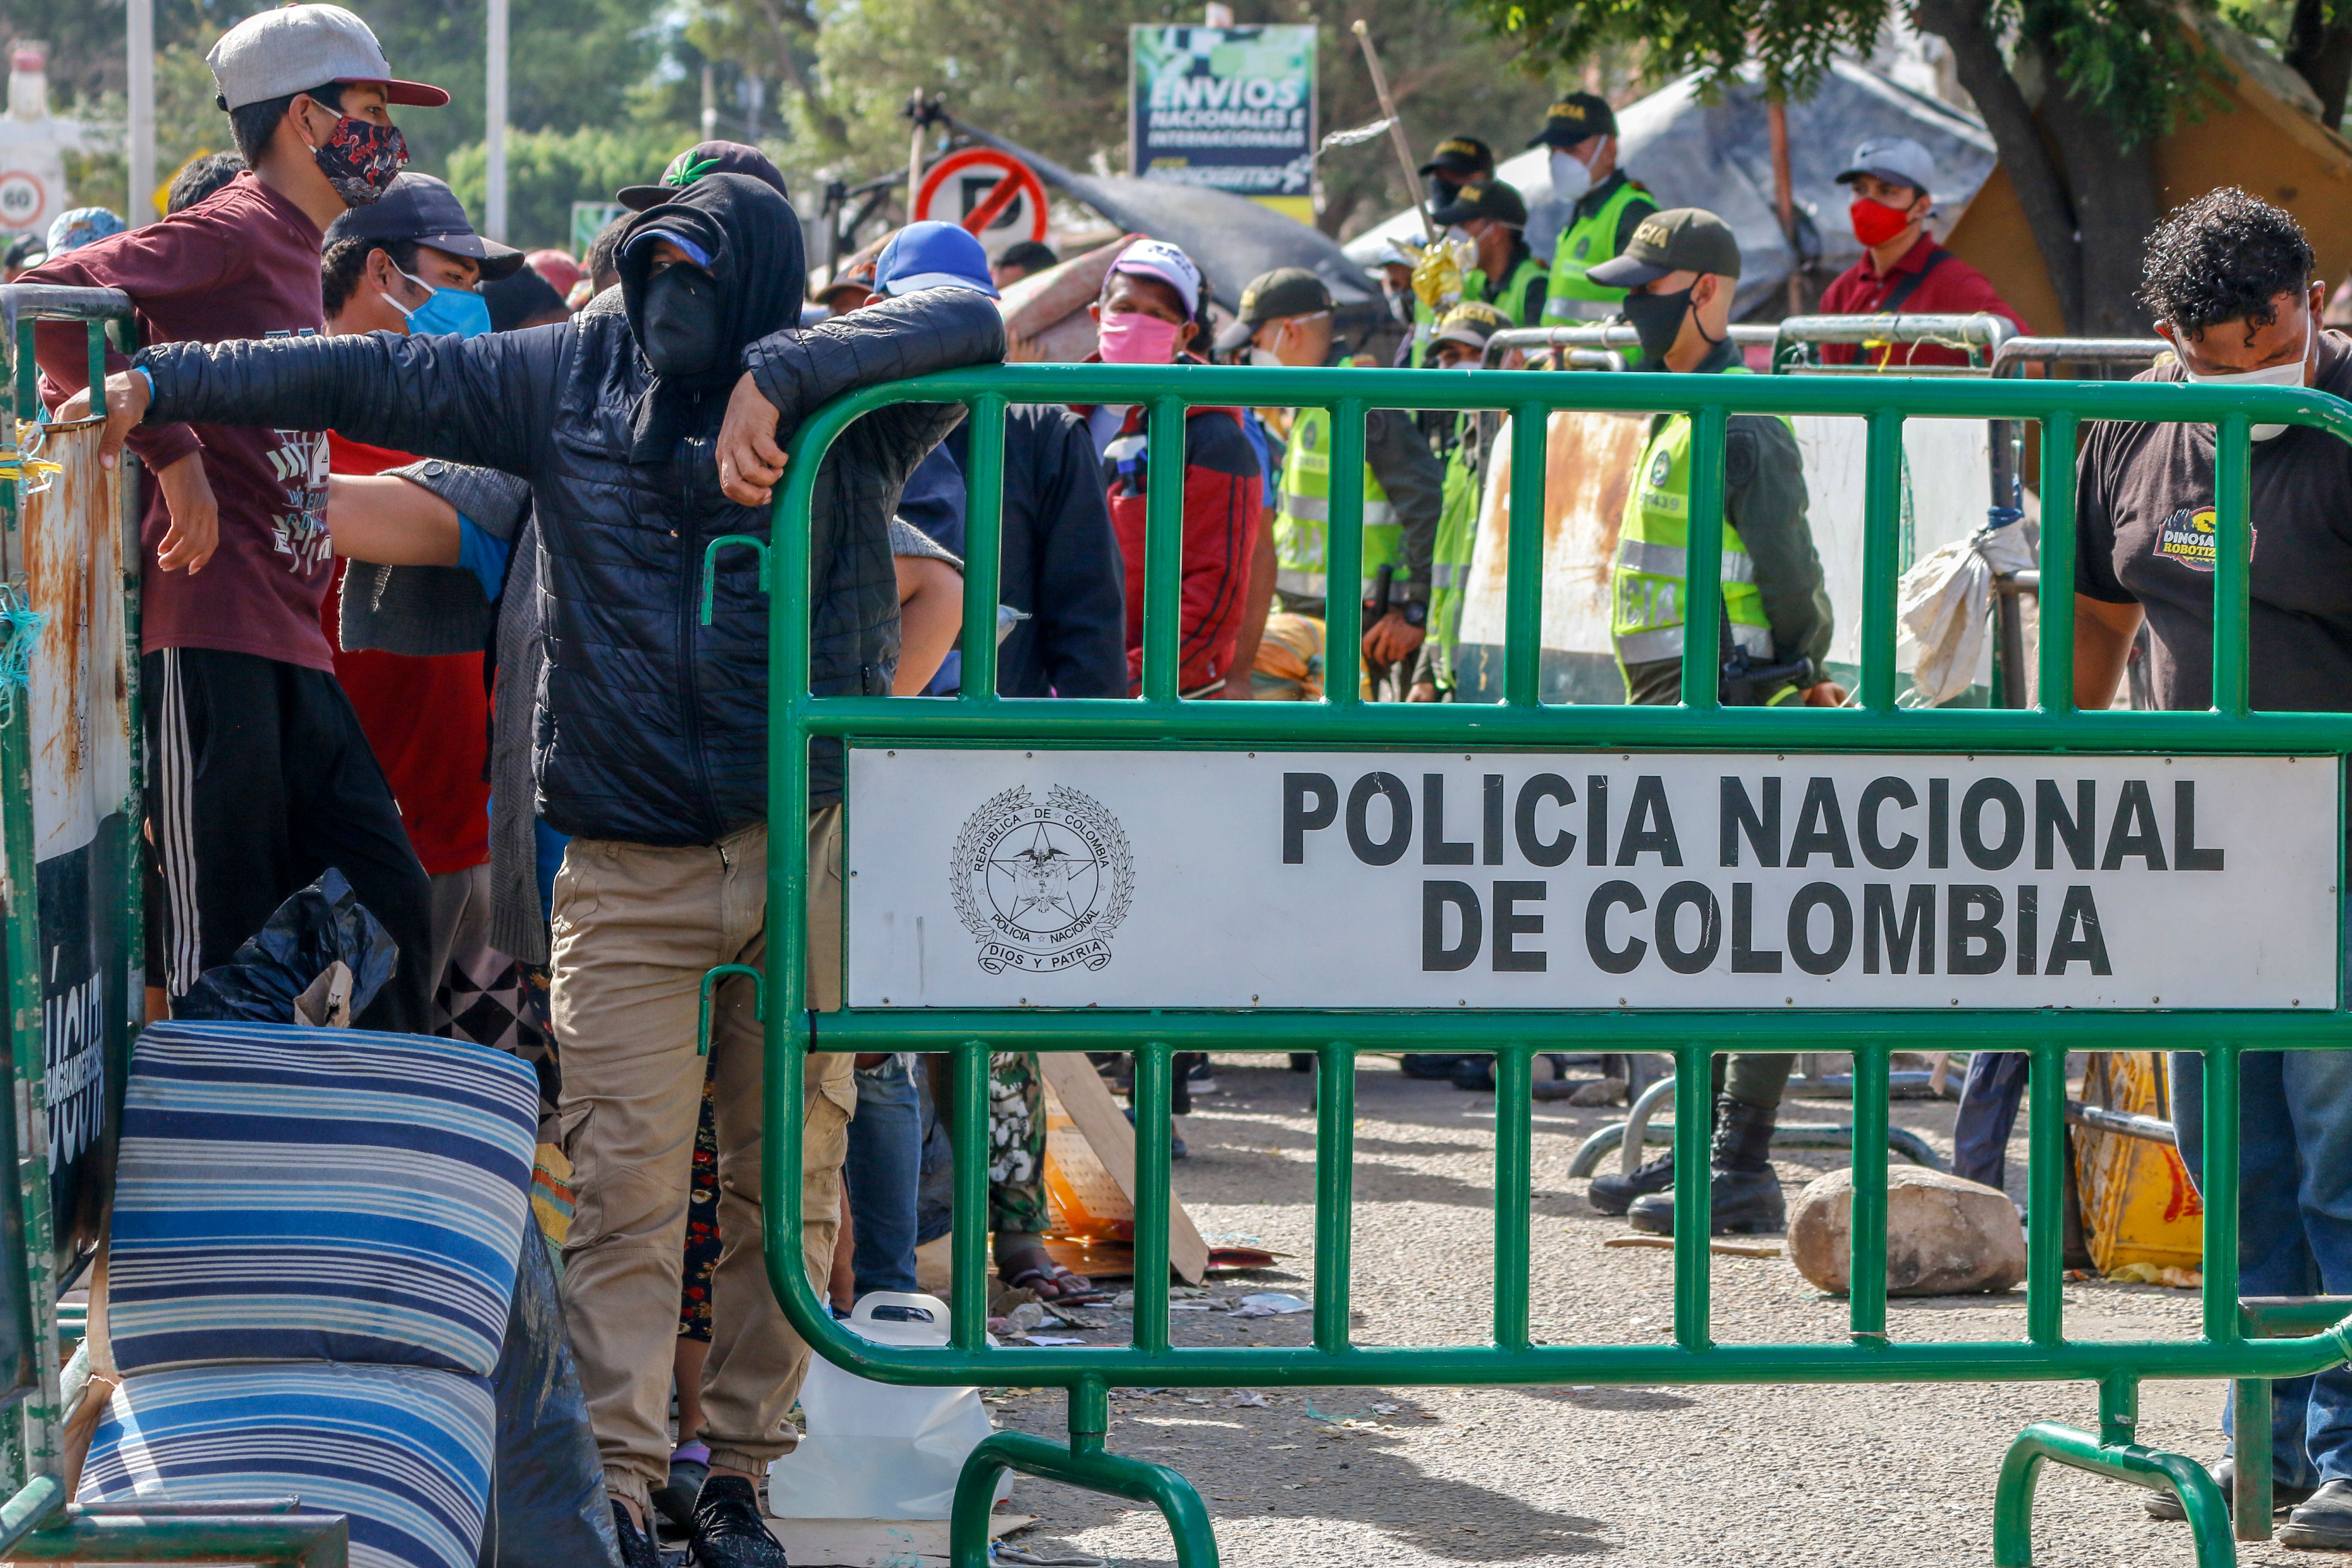 Venezuelans queue as they are being transferred from the Simon Bolivar international crossing point to the Tienditas International Bridge where they will be housed in tents, in Cucuta, Colombia, on the border with Venezuela, on June 14, 2020. - Hundreds of Venezuelans who fled to neighbouring Colombia during their country's economic crisis are now returning home, pushed by the deadly novel coronavirus and Colombia's own pandemic woes. Although the border is officially closed as a measure taken to halt the spread of coronavirus, Colombia opened a "humanitarian corridor". (SCHNEYDER MENDOZA/AFP via Getty Images)